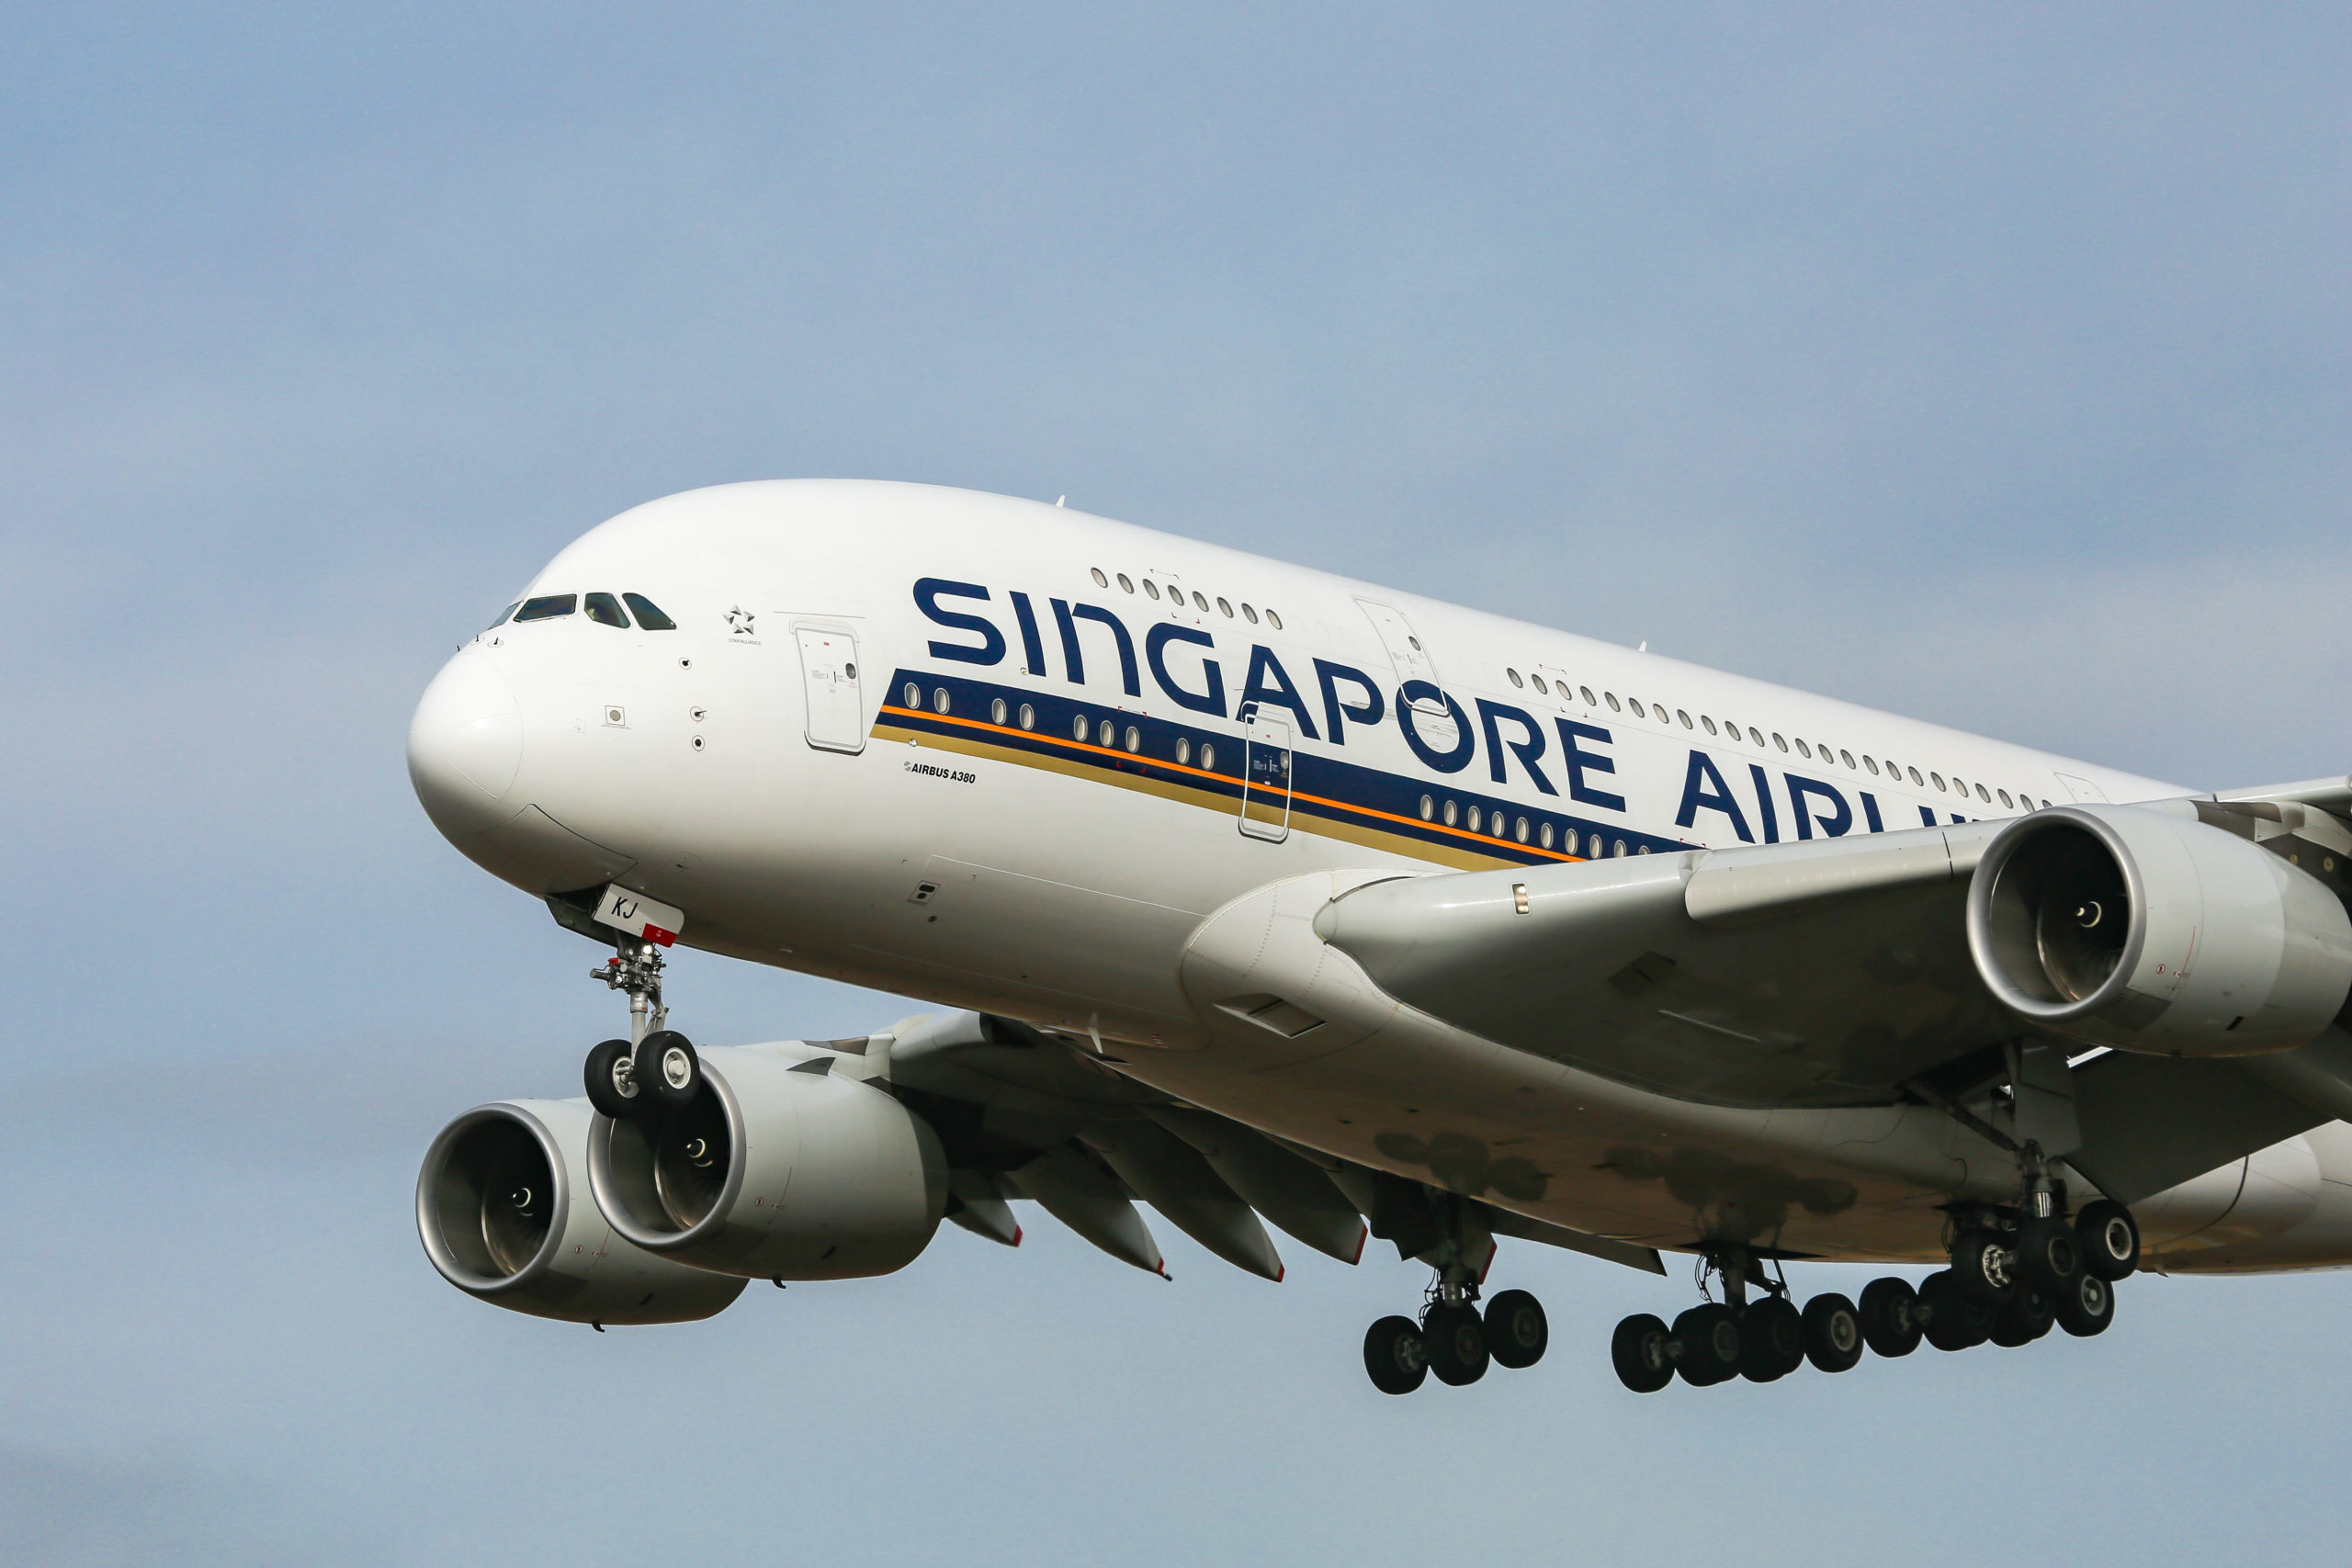 Singapore Airways (SIA) diverts flights from Iranian airspace